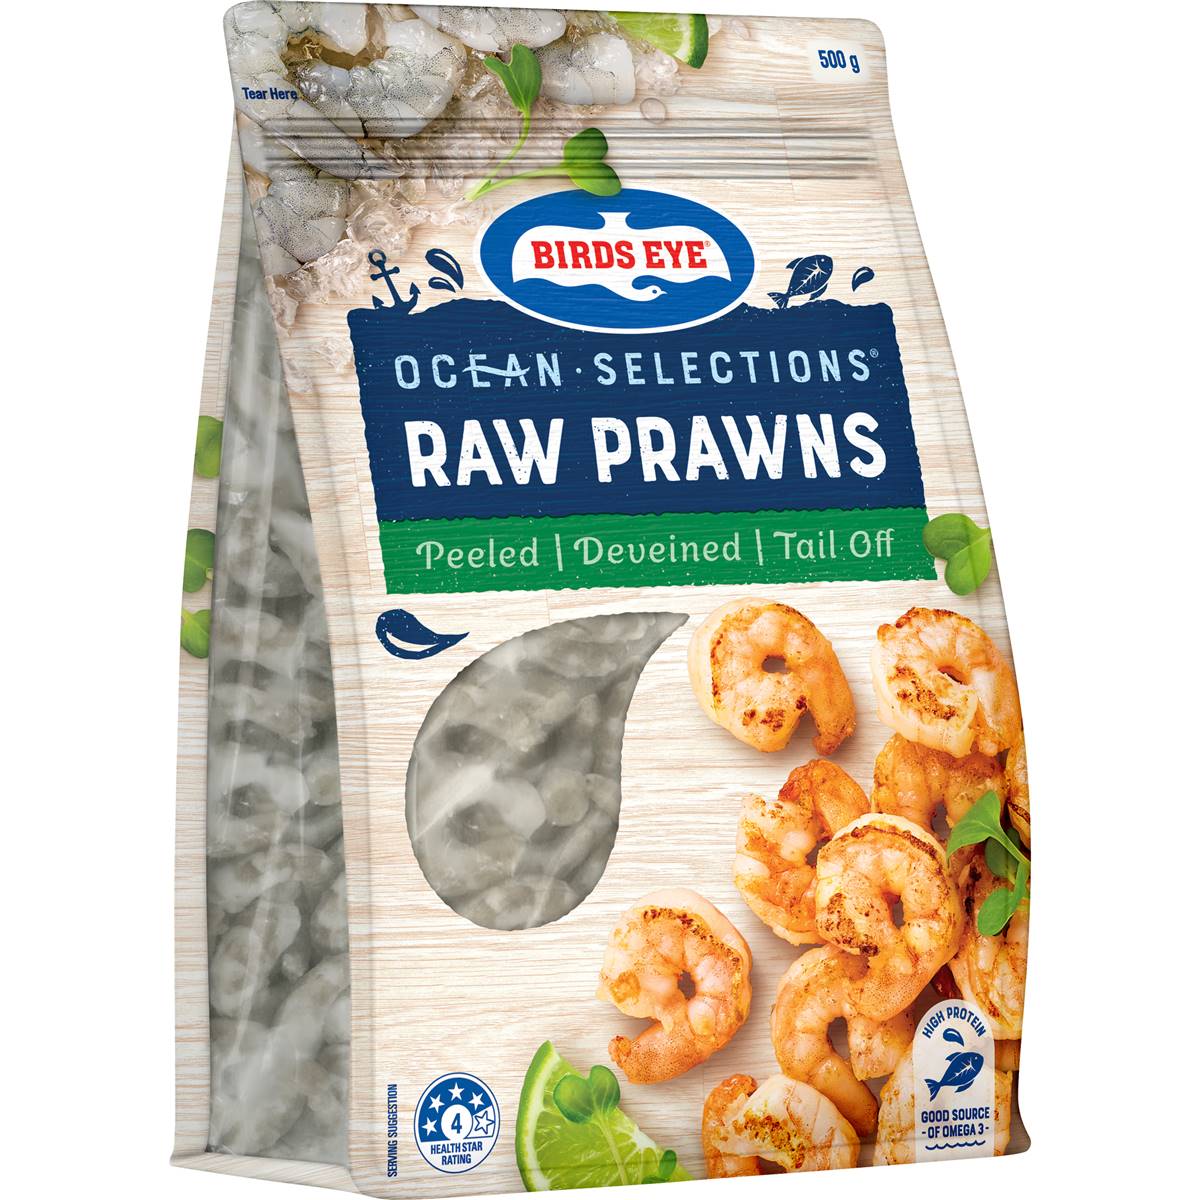 Calories in Birds Eye Ocean Selections Raw Prawns Frozen, Peeled & Tail Off